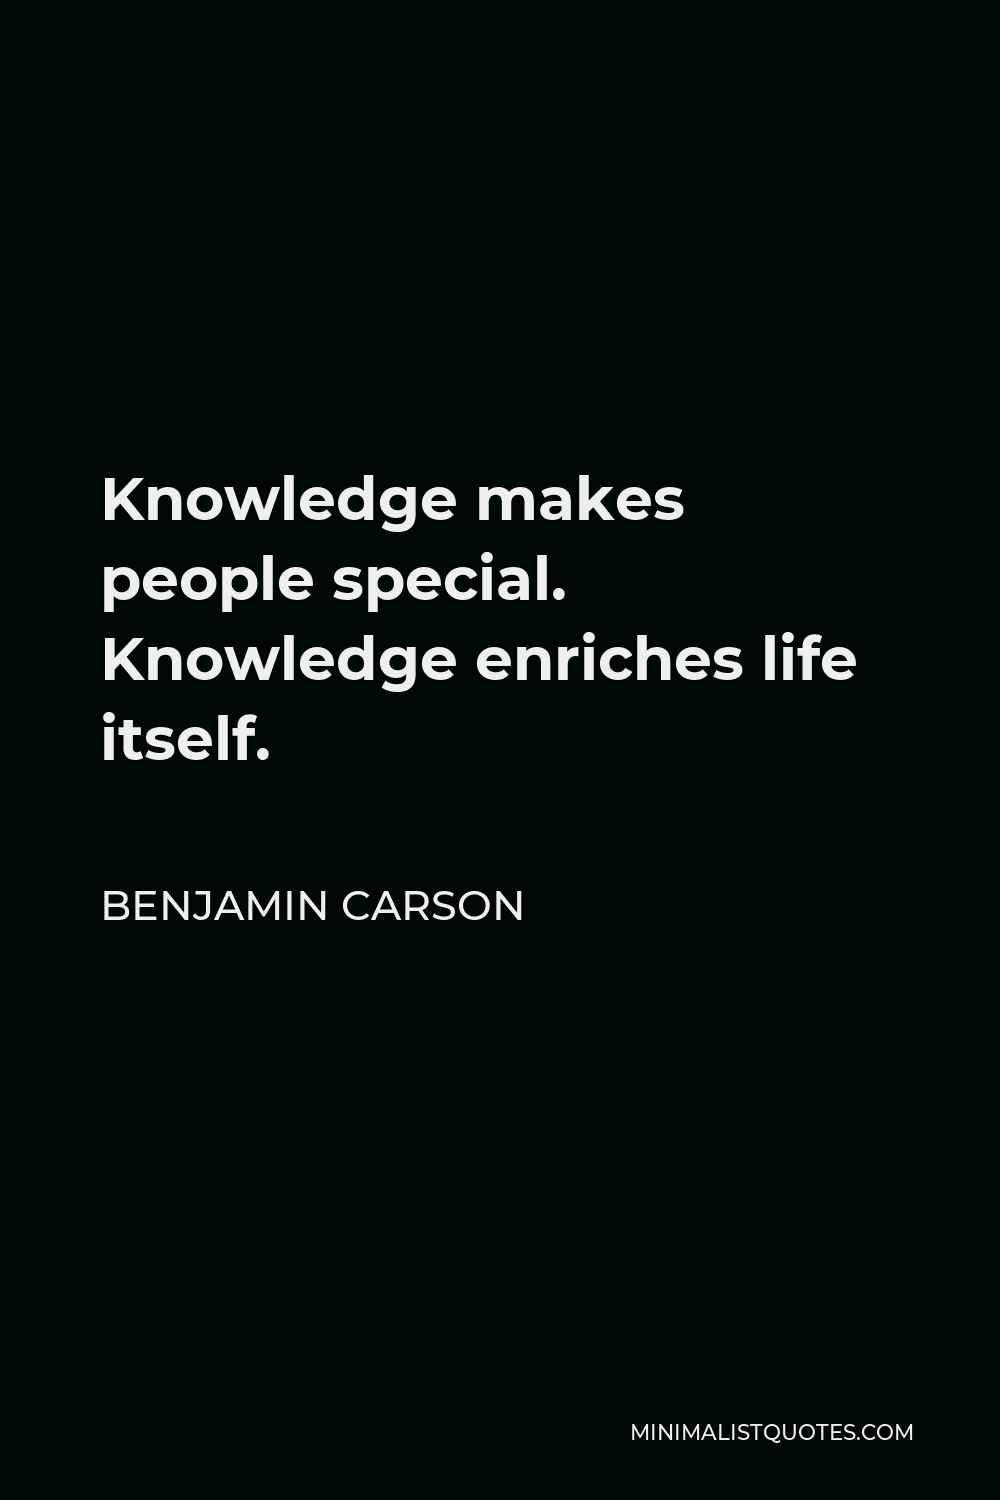 Benjamin Carson Quote - Knowledge makes people special. Knowledge enriches life itself.